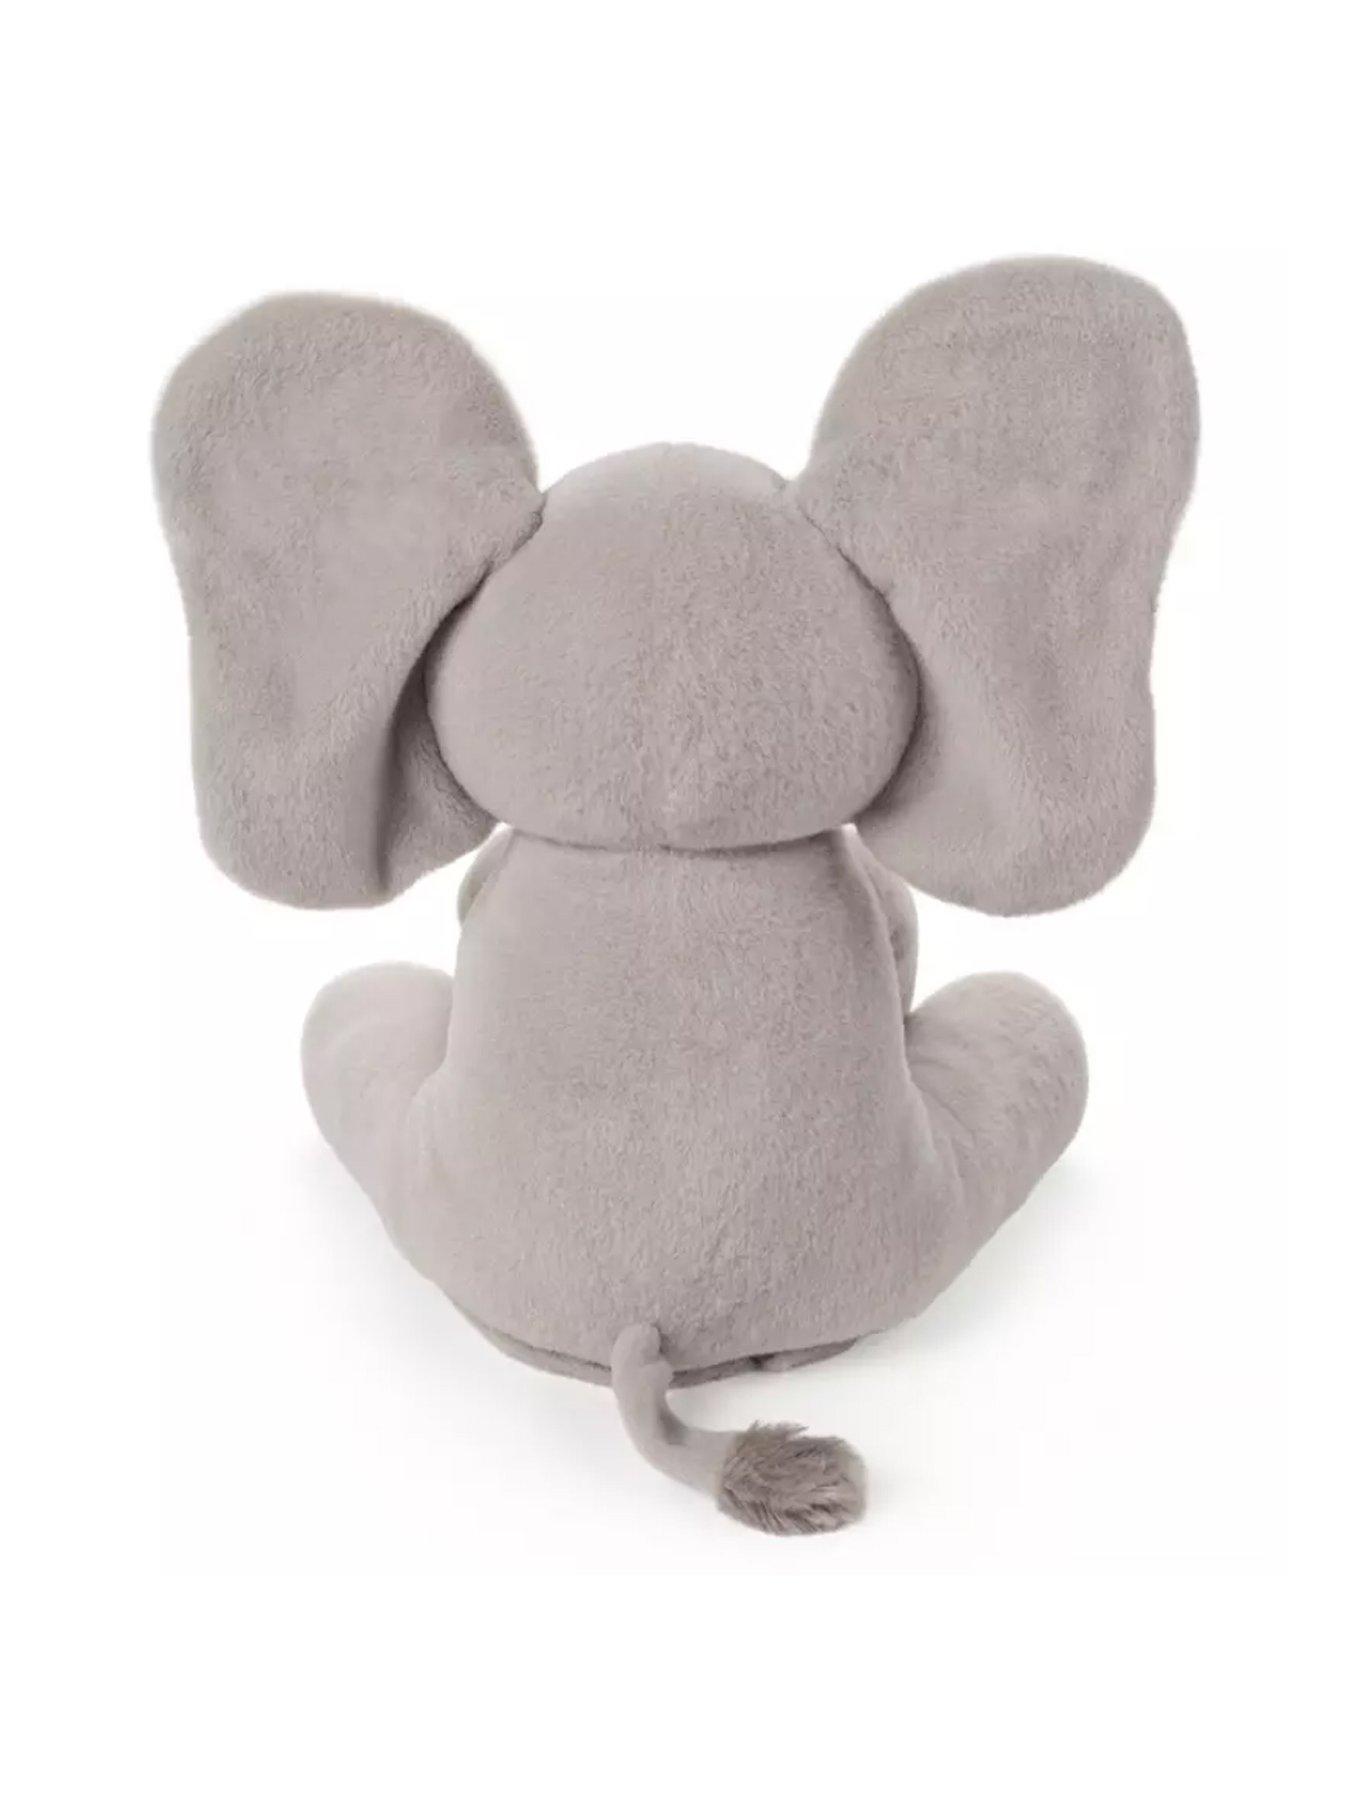 toy elephant that sings